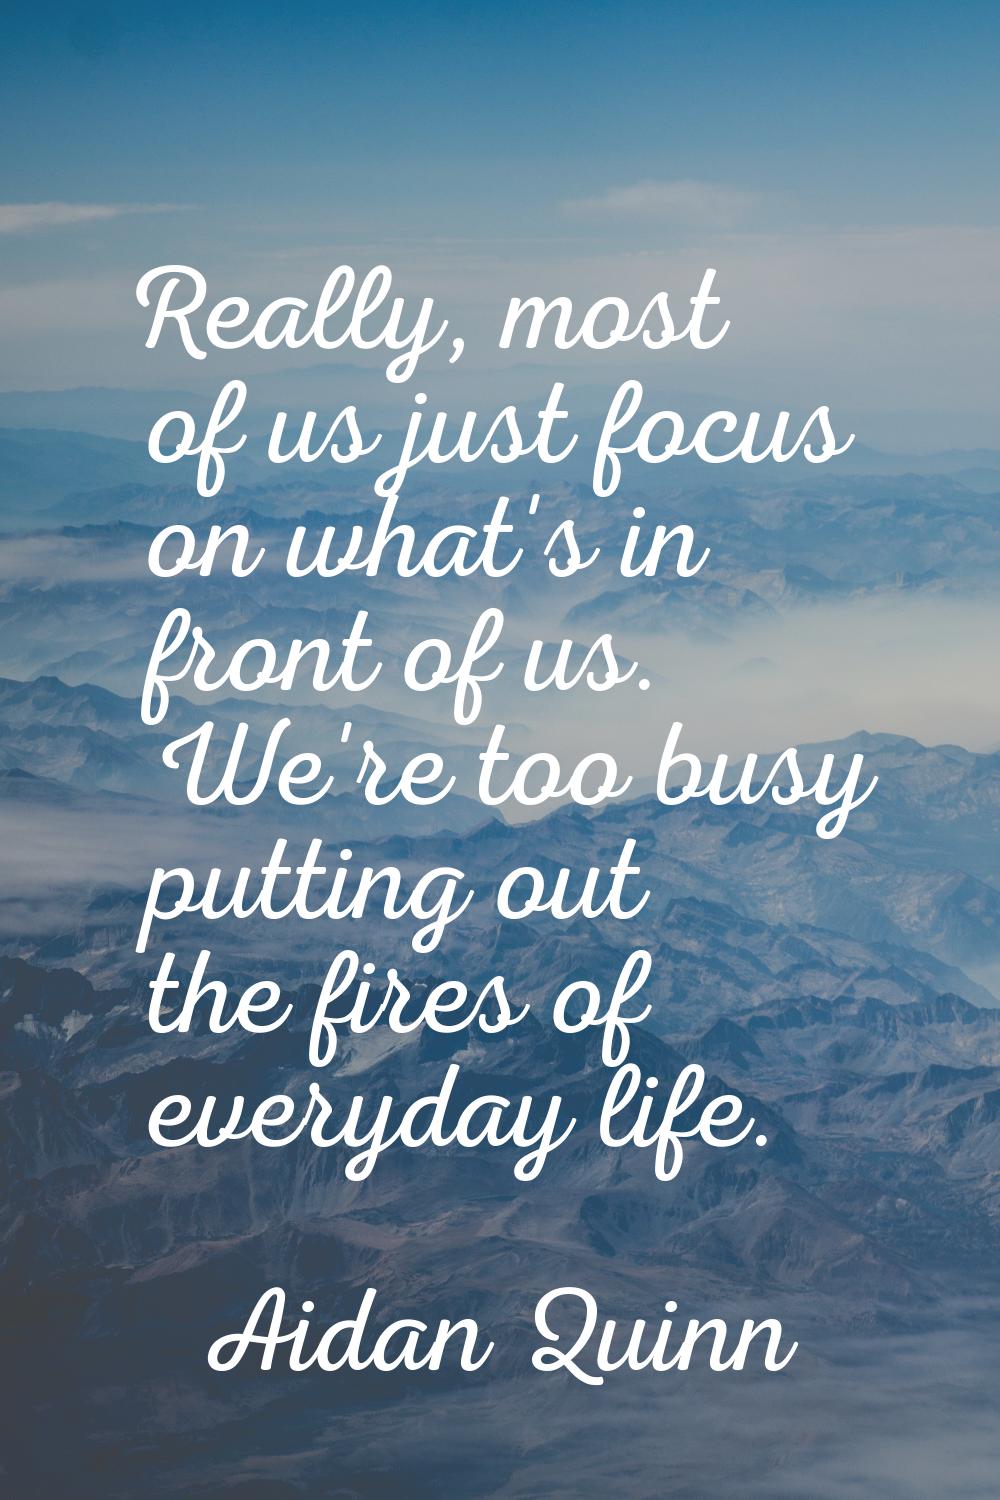 Really, most of us just focus on what's in front of us. We're too busy putting out the fires of eve